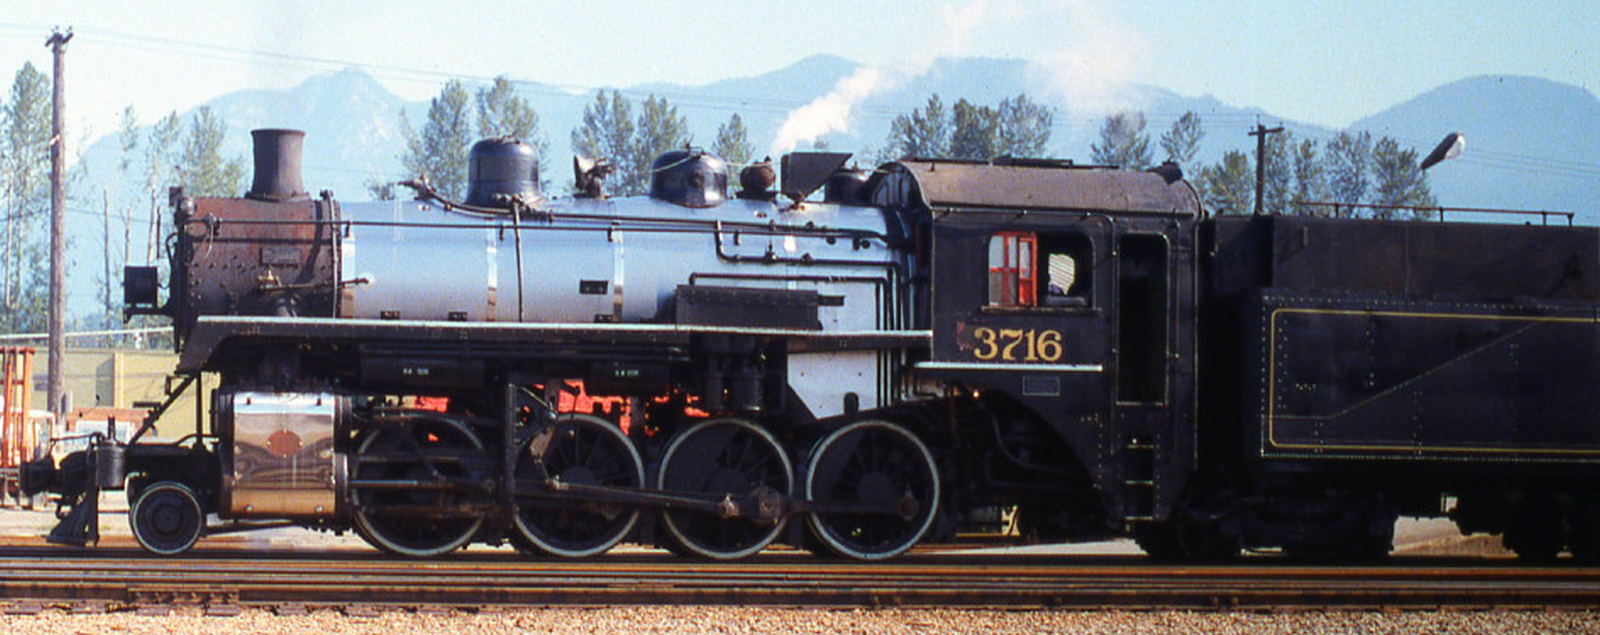 No. 3716 in July 1986 in North Vancouver, British Columbia